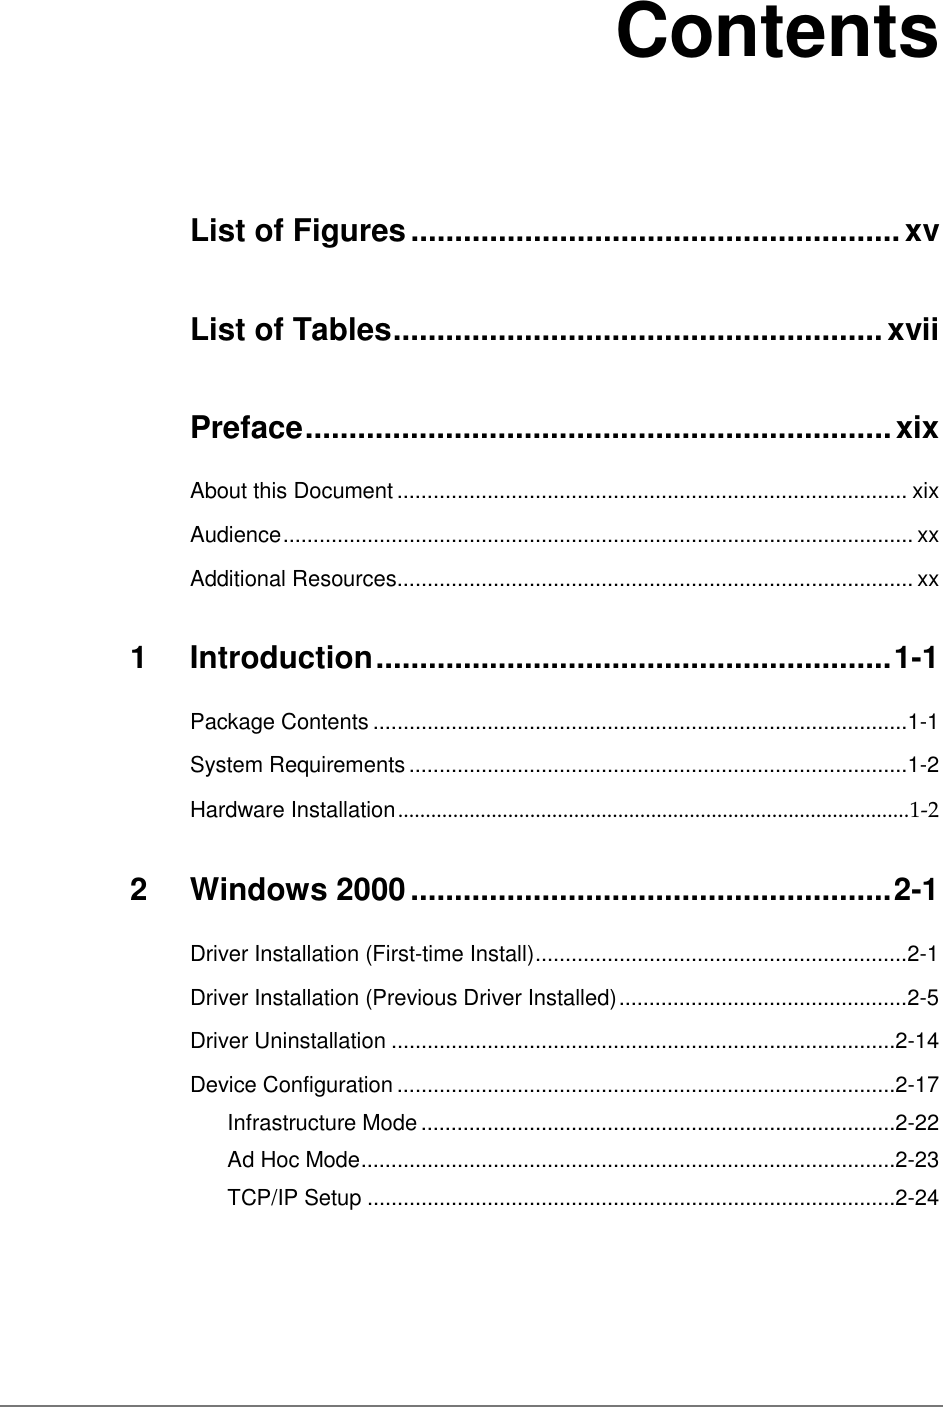 ContentsList of Figures........................................................xvList of Tables........................................................xviiPreface...................................................................xixAbout this Document ..................................................................................... xixAudience......................................................................................................... xxAdditional Resources...................................................................................... xx1 Introduction...........................................................1-1Package Contents .........................................................................................1-1System Requirements ...................................................................................1-2Hardware Installation.............................................................................................1-22 Windows 2000.......................................................2-1Driver Installation (First-time Install)..............................................................2-1Driver Installation (Previous Driver Installed)................................................2-5Driver Uninstallation ....................................................................................2-14Device Configuration ...................................................................................2-17Infrastructure Mode ...............................................................................2-22Ad Hoc Mode.........................................................................................2-23TCP/IP Setup ........................................................................................2-24